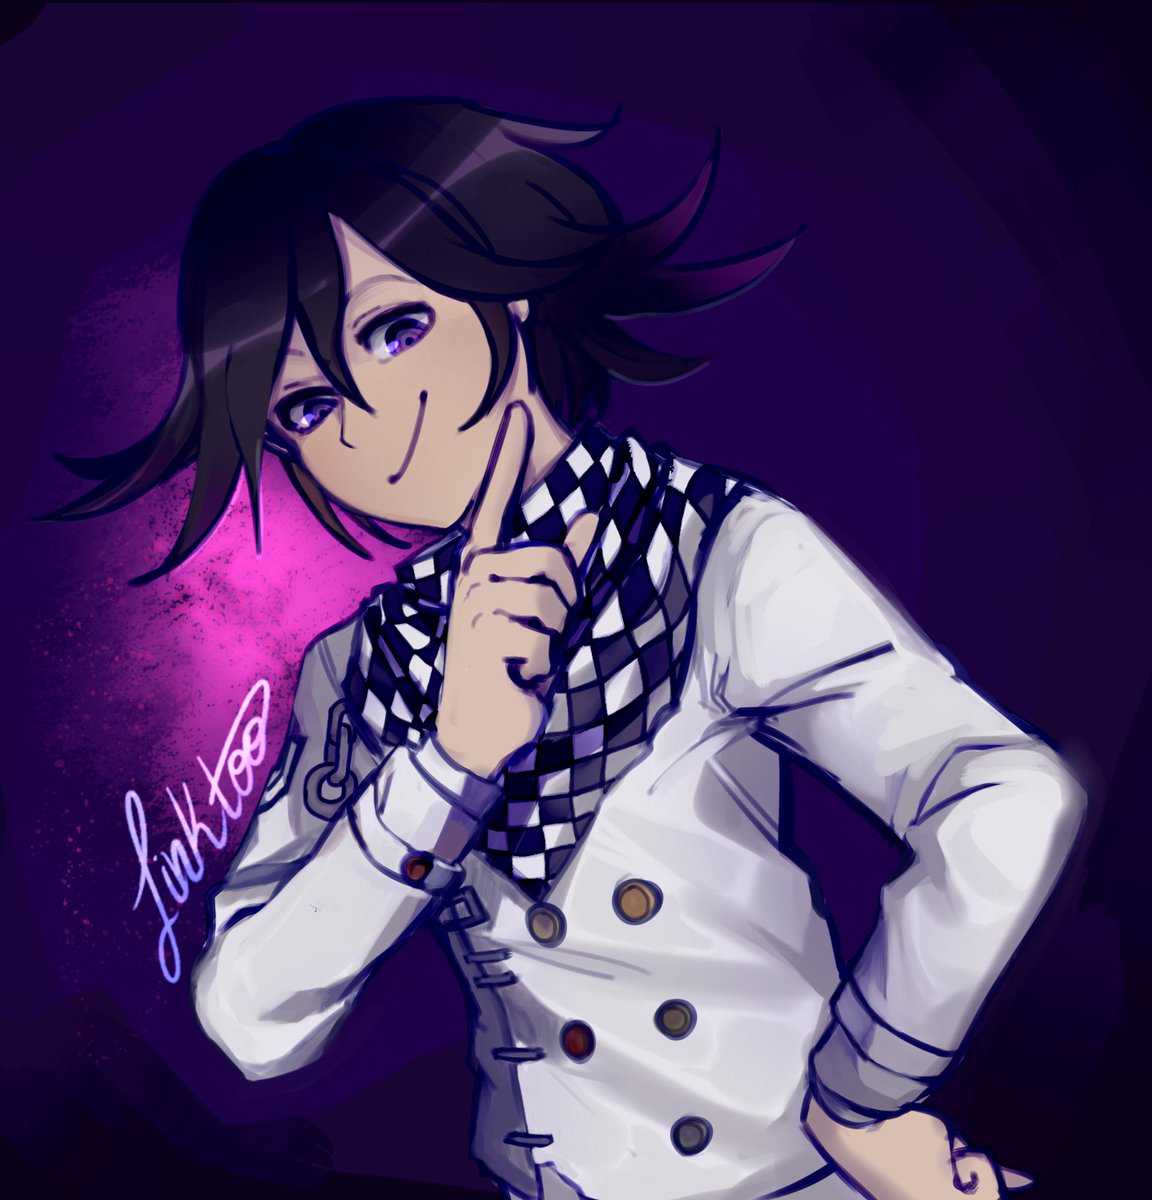 me, arriving several years late to the danganronpa fandom with nothing new to offer for character analysis: "kokichi is my favourite character"

#danganronpa #danganronpav3 